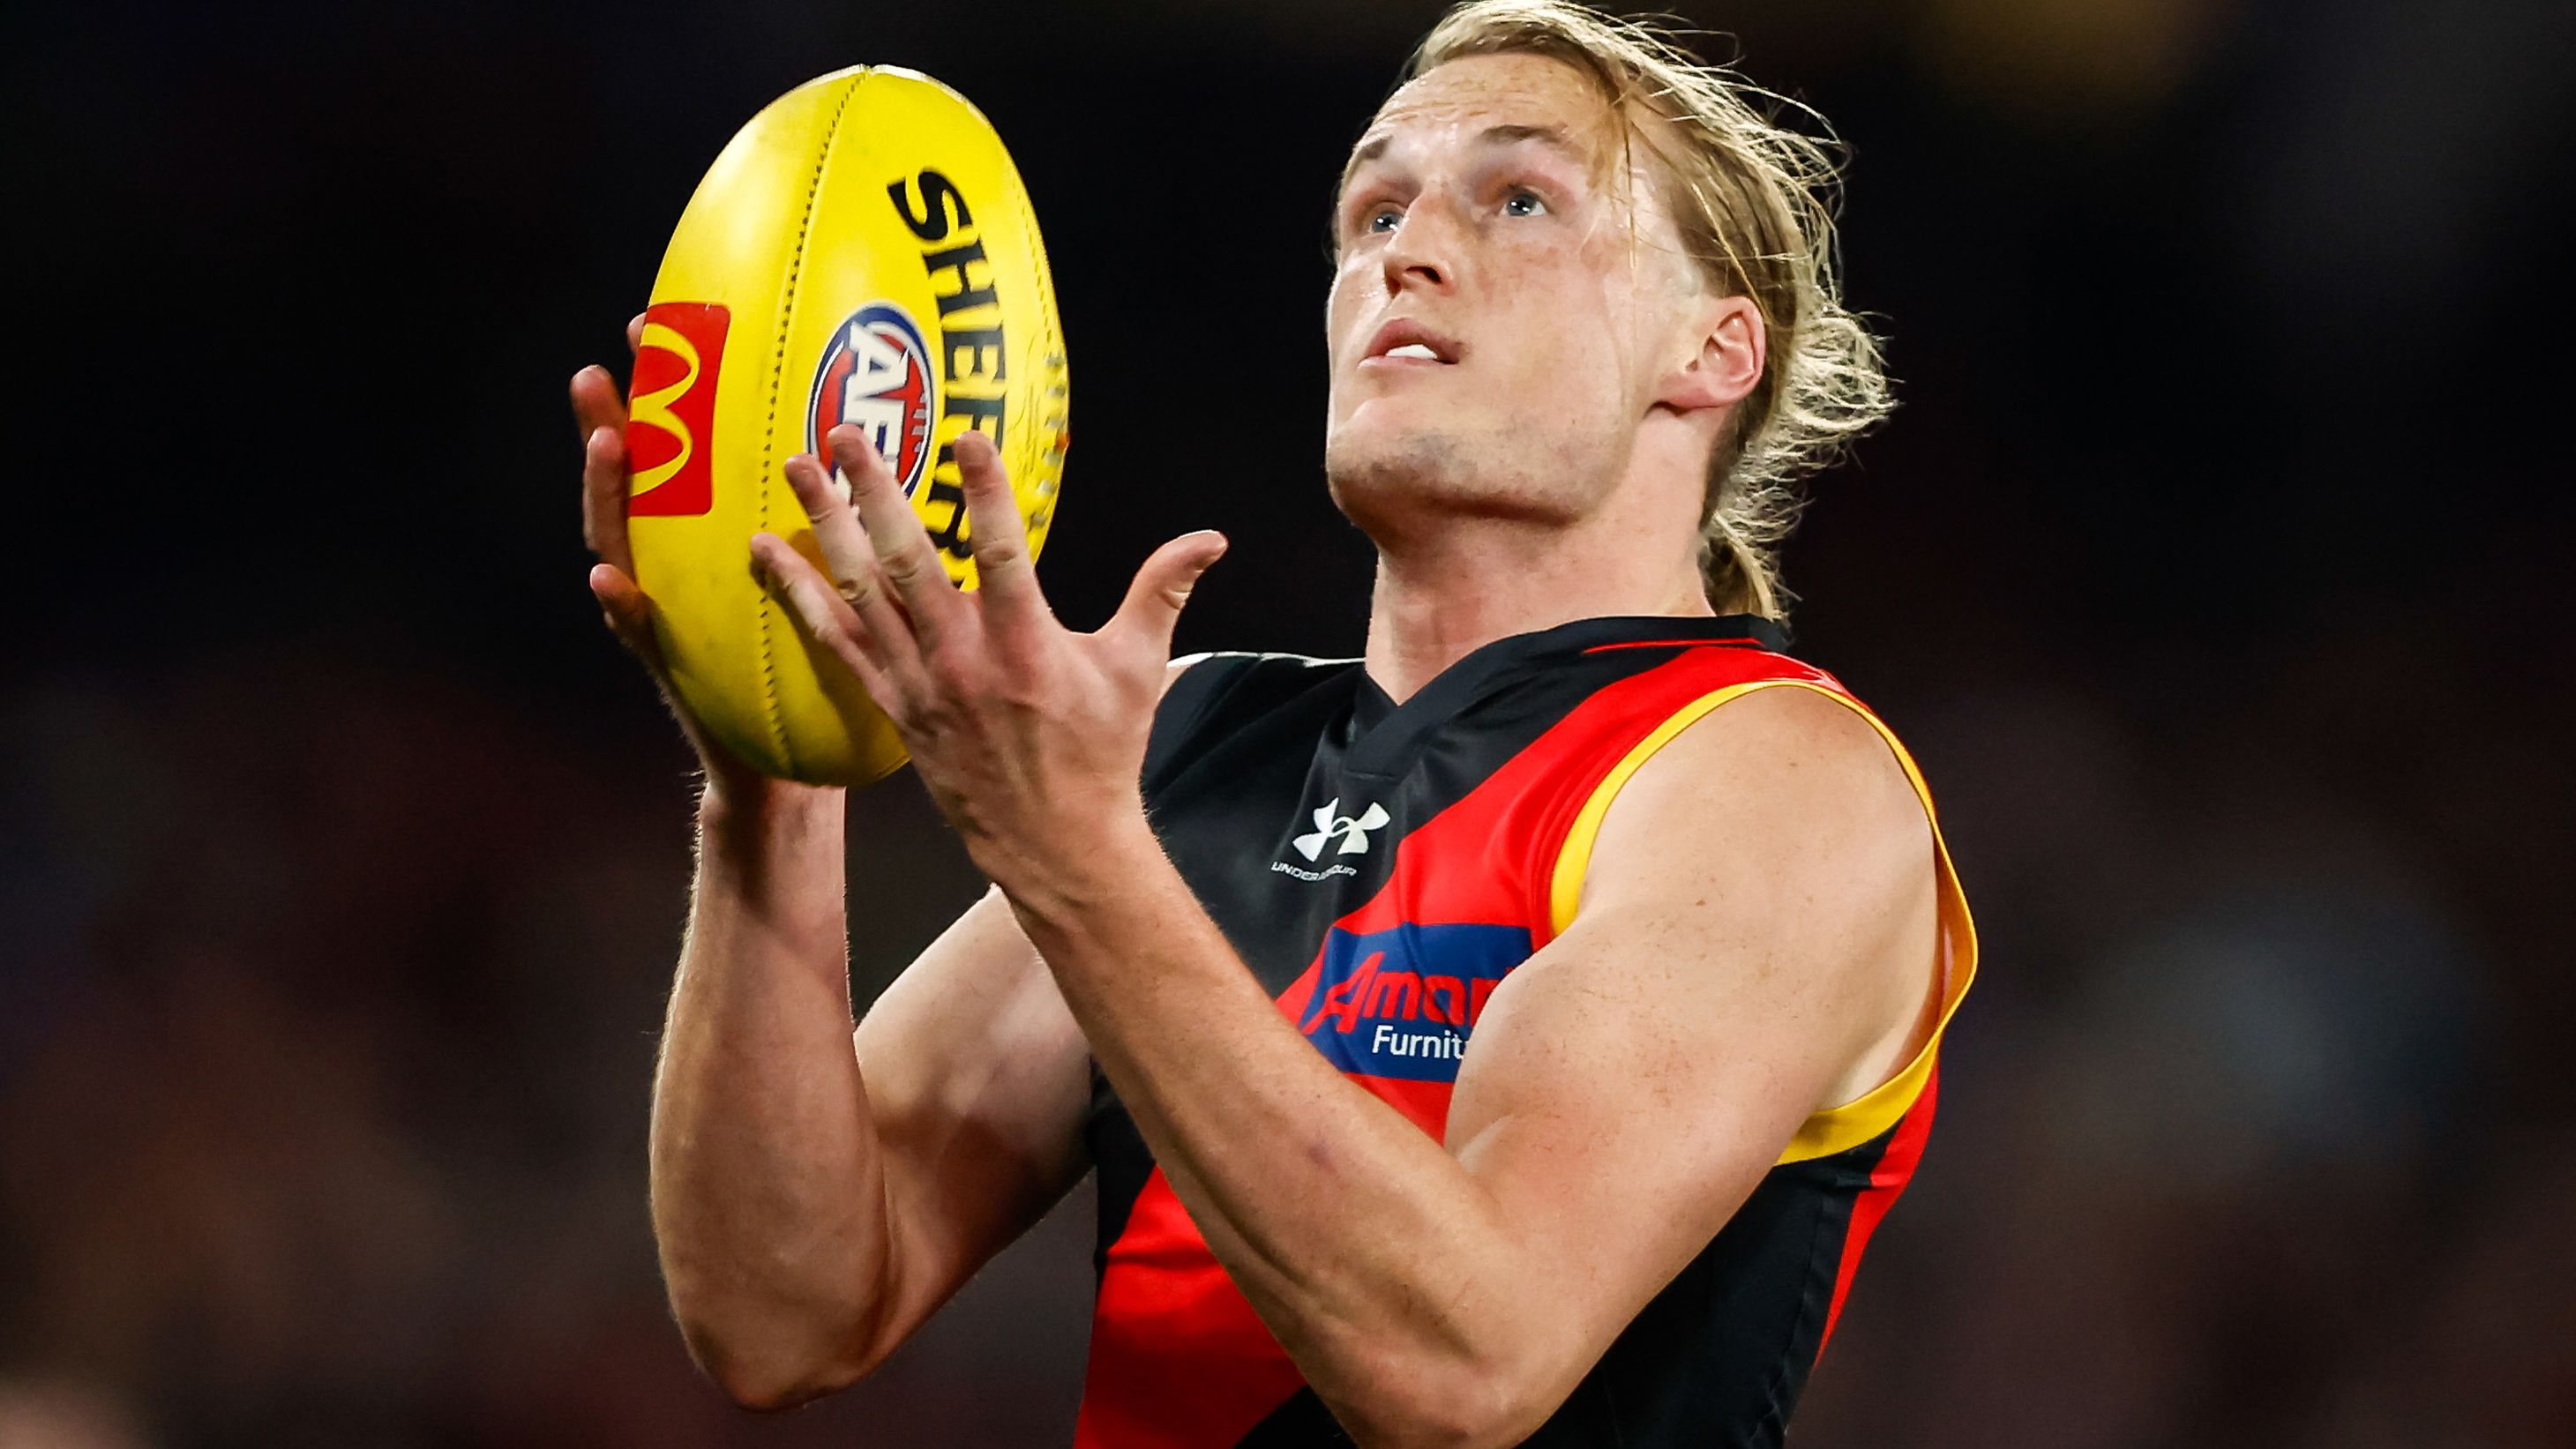 Mason Redman admits he would've left Essendon last year after signing five-year extension